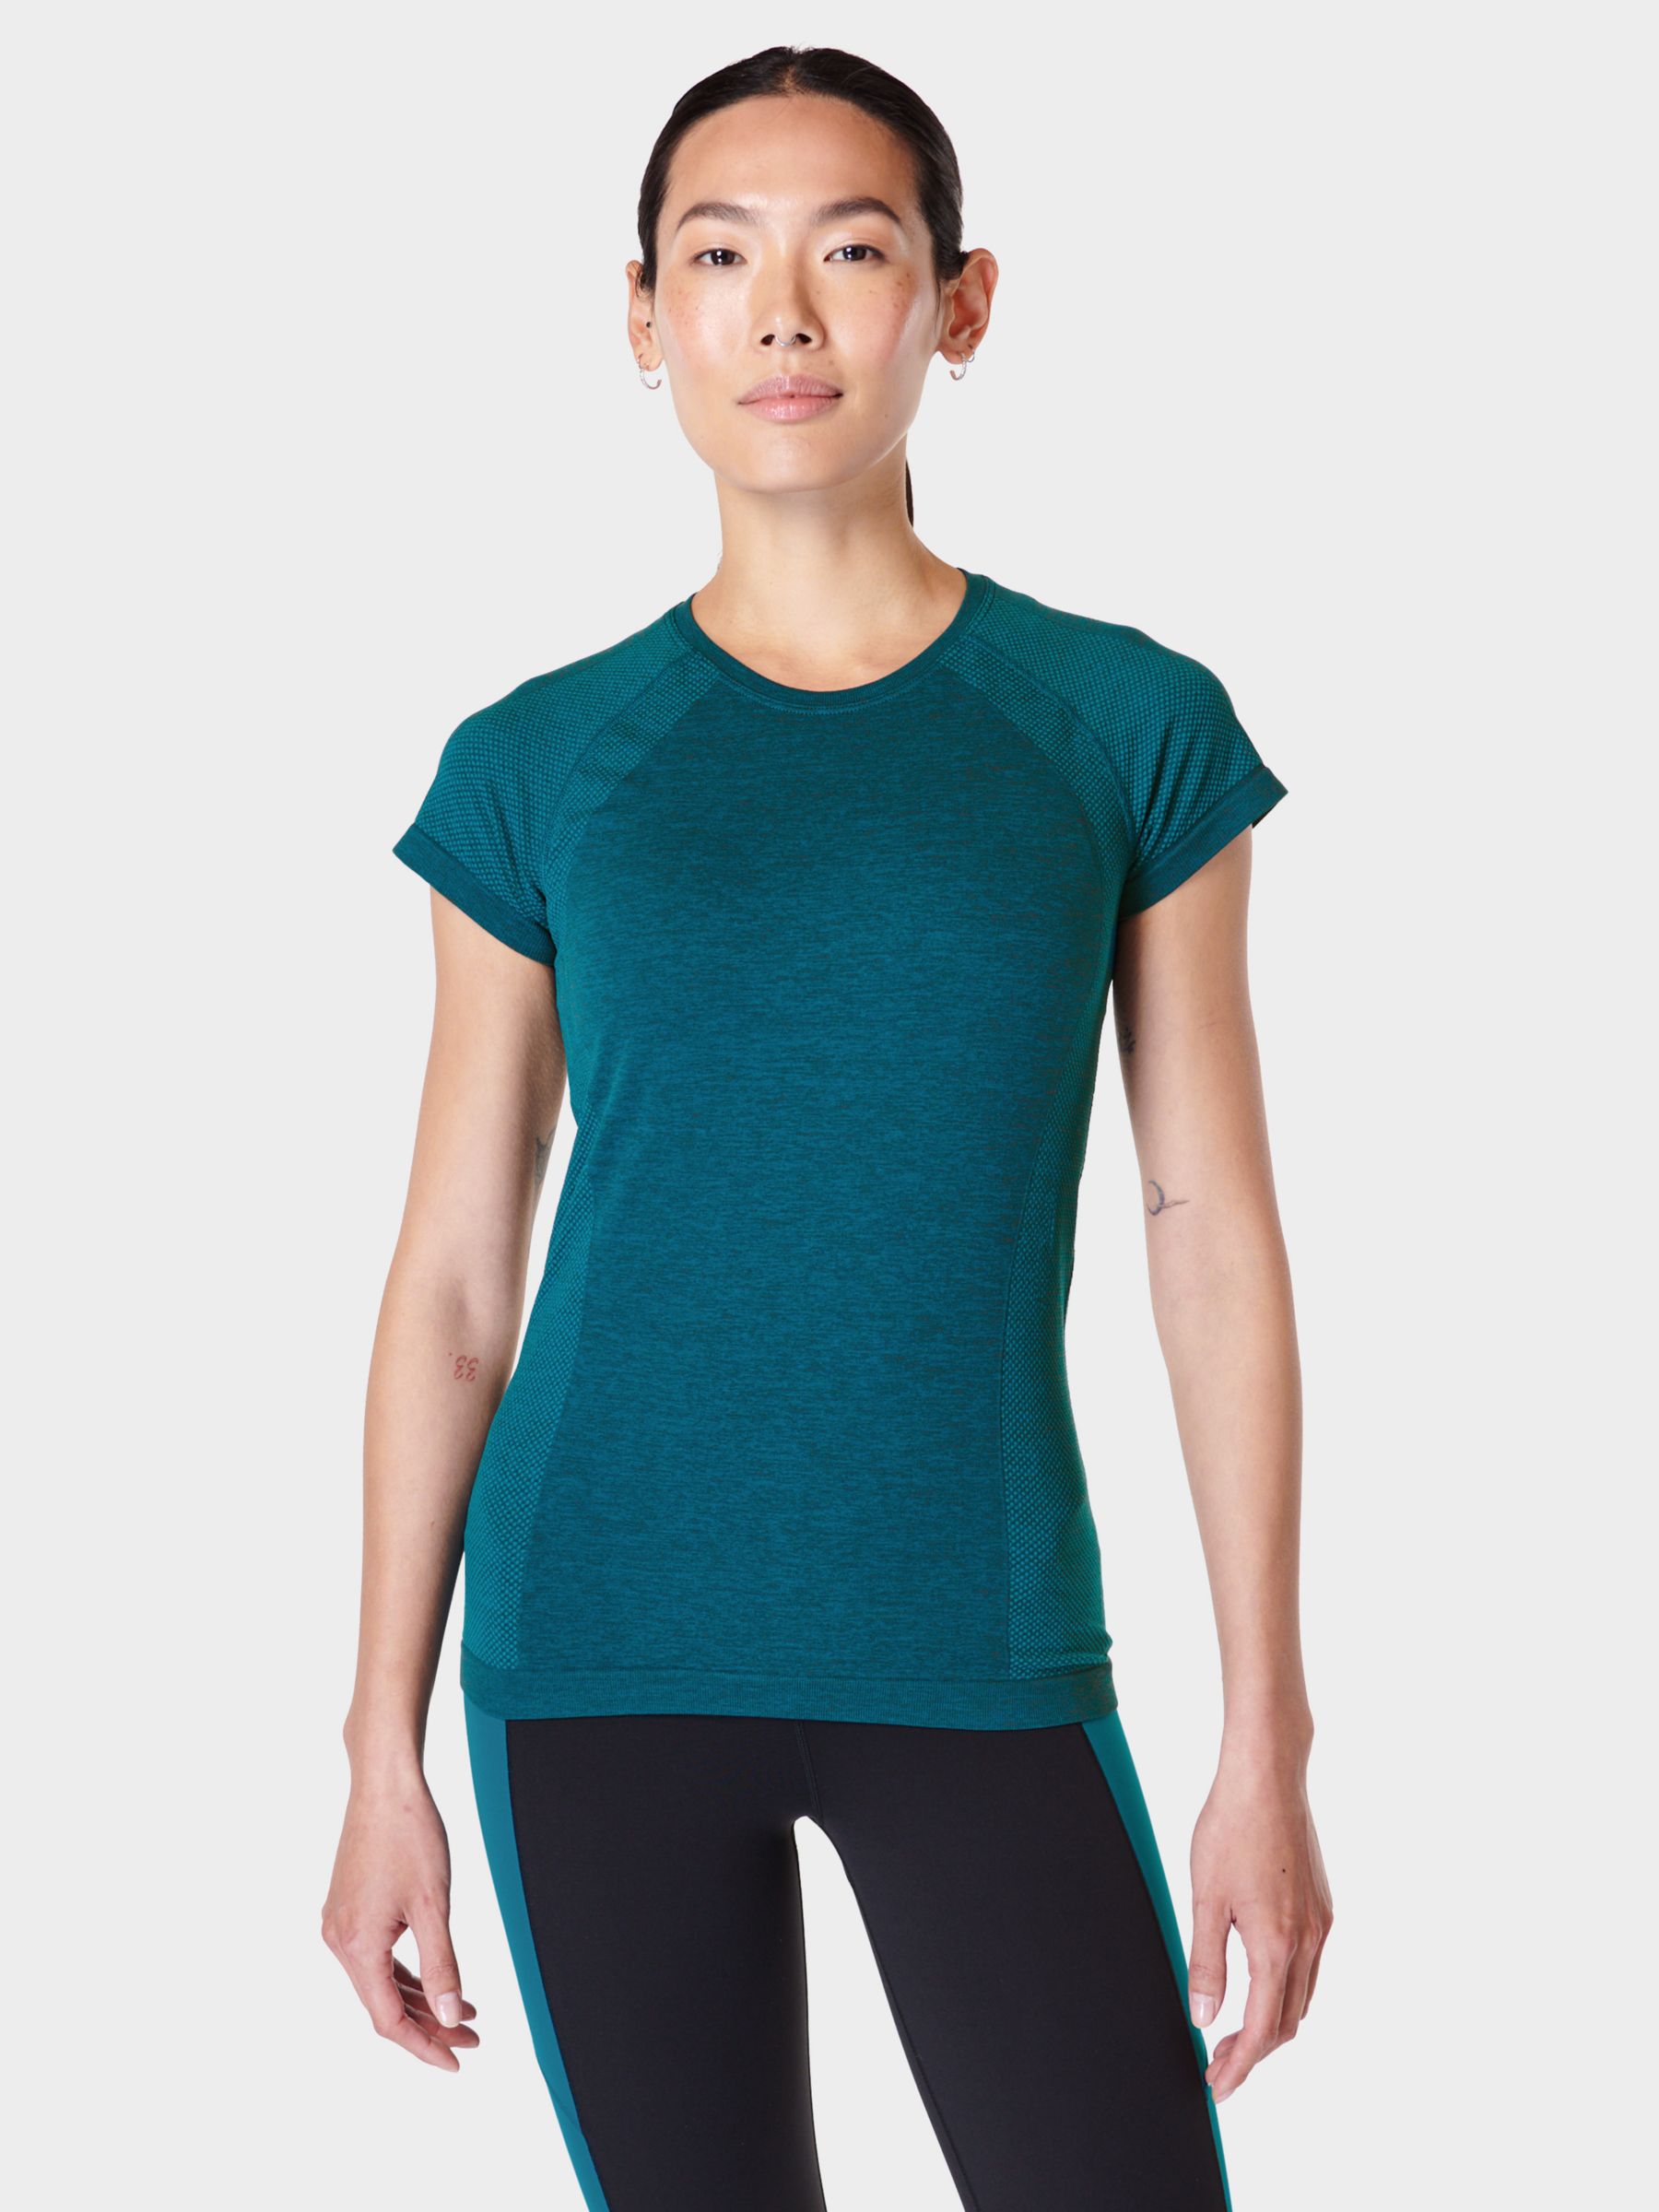 Sweaty Betty Athlete Seamless Long Sleeve Gym Top, Navy Blue at